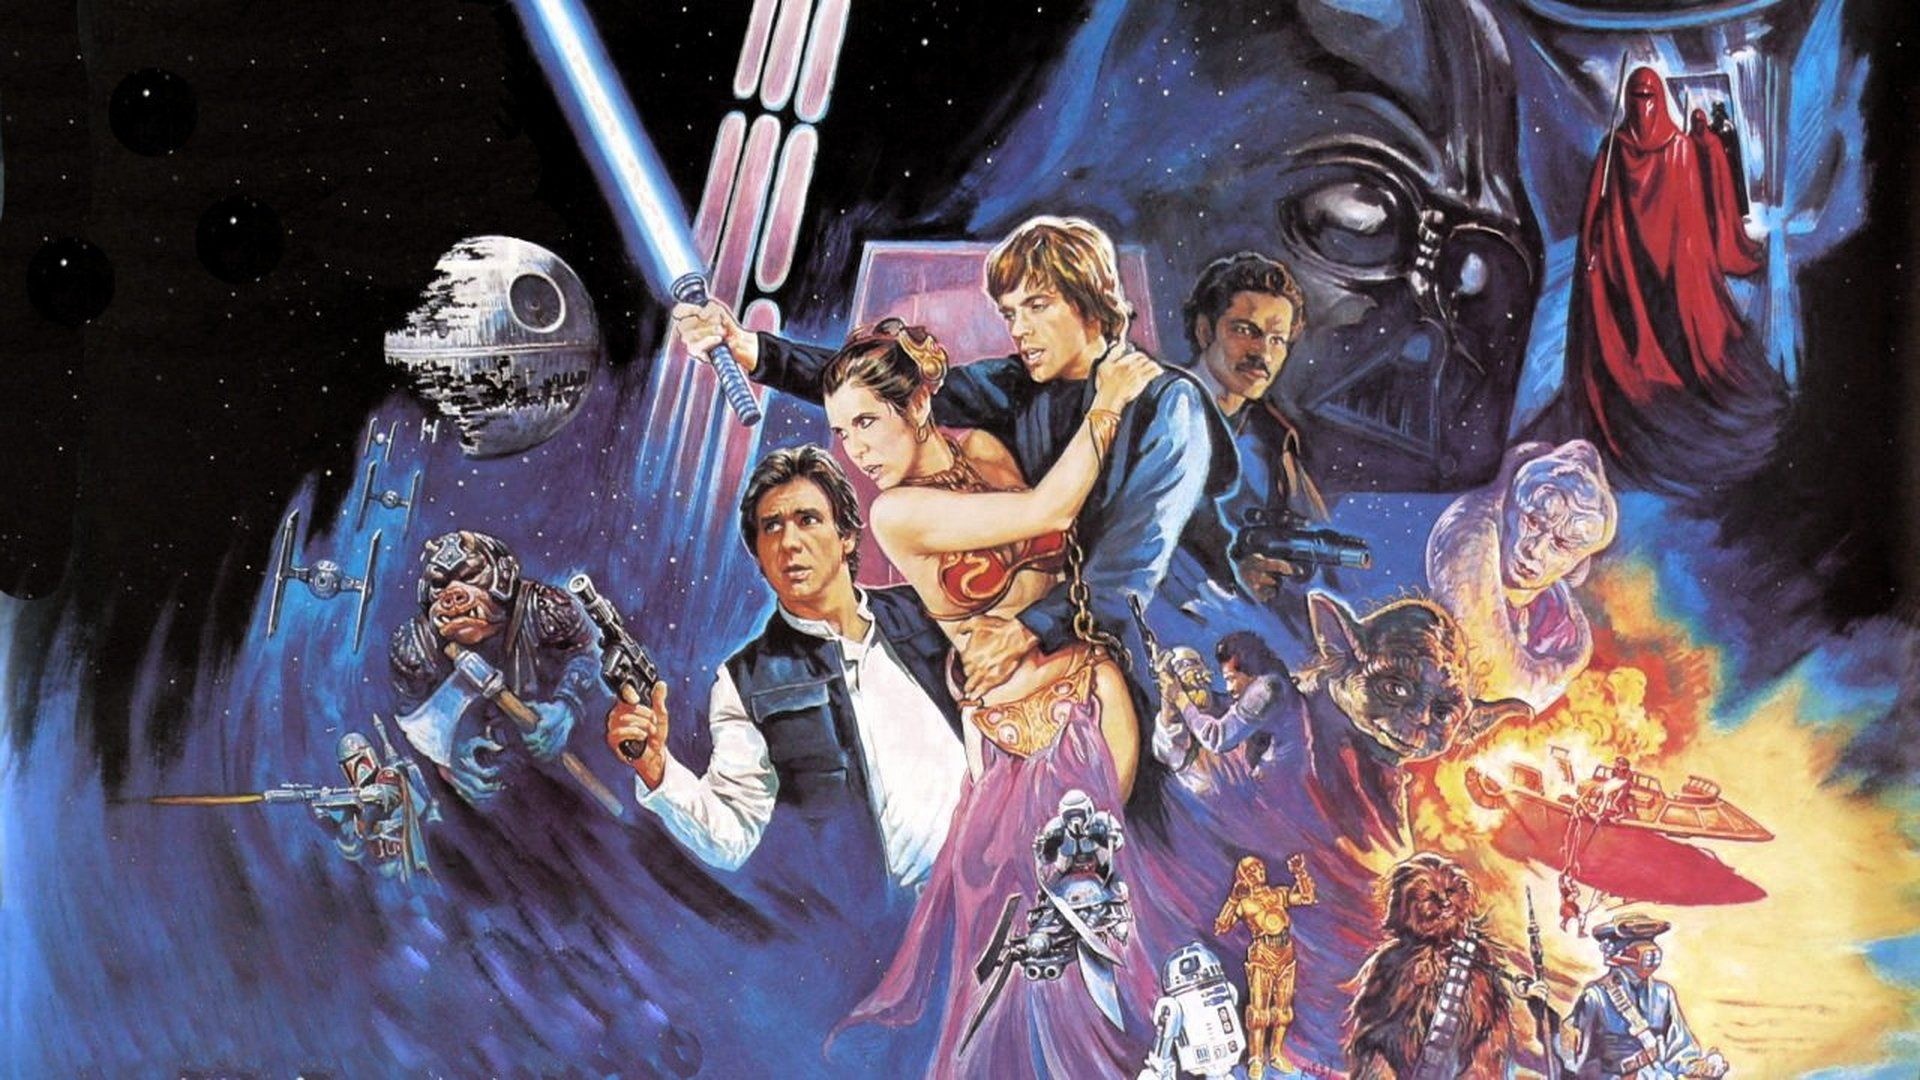 Star Wars saga, Epic conclusion, Galactic battle, Iconic characters, 1920x1080 Full HD Desktop